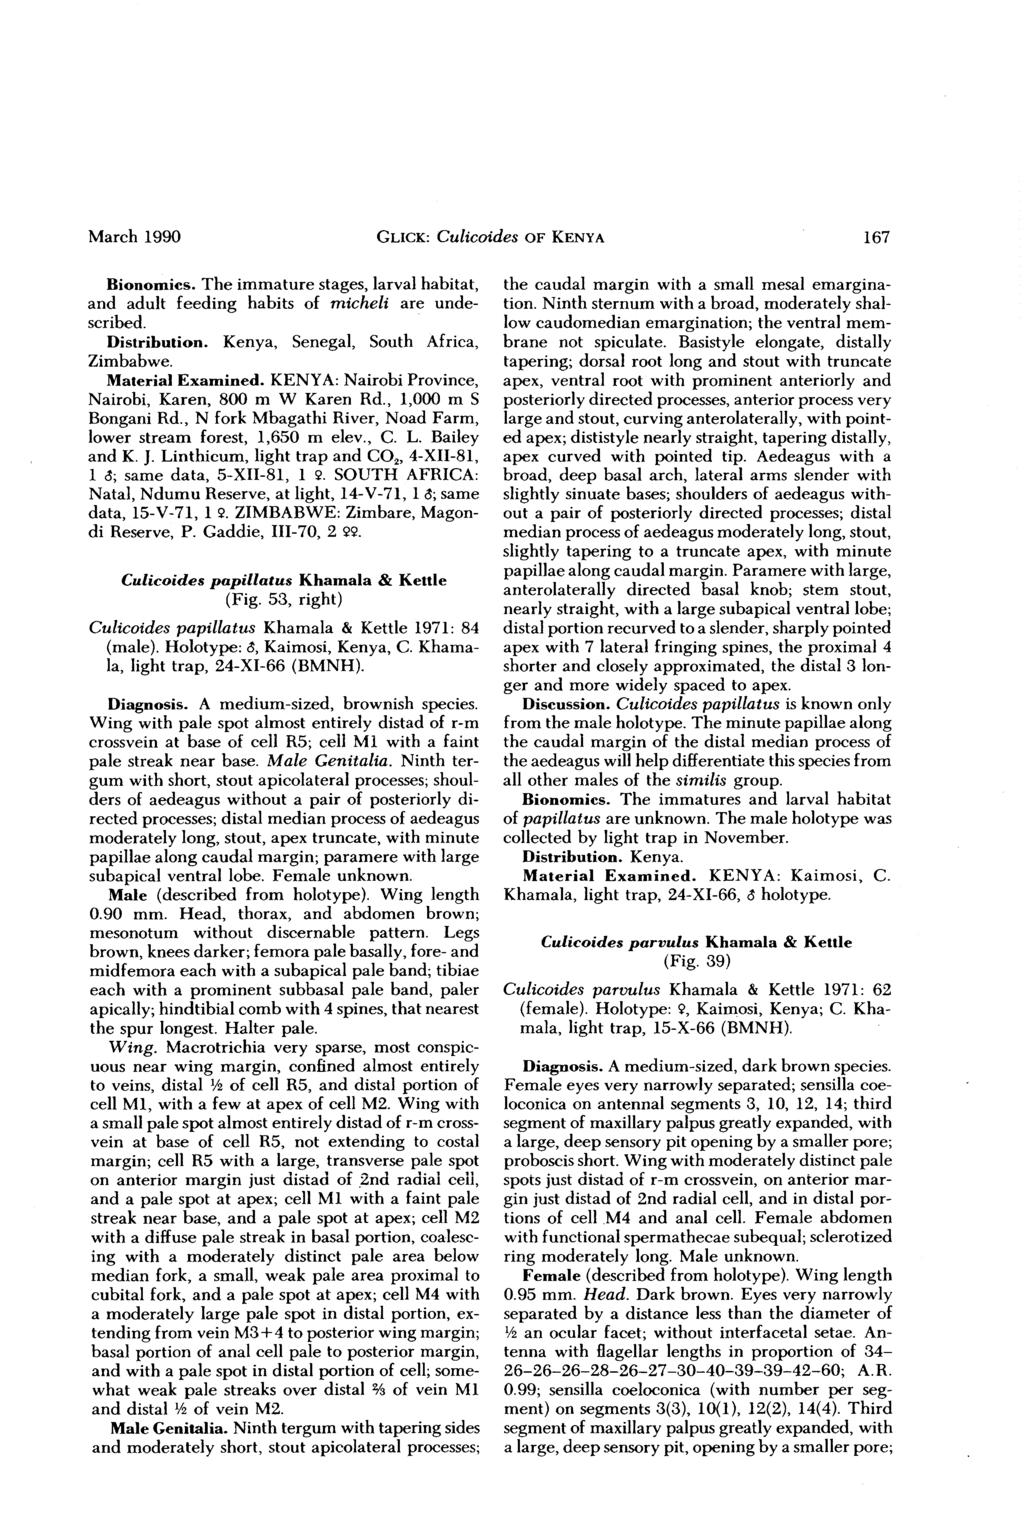 March 1990 GLICK: Culicoides OF KENYA 167 Bionomics. The immature stages, larval habitat, and adult feeding habits of micheli are undescribed. Distribution. Kenya, Senegal, South Africa, Zimbabwe.